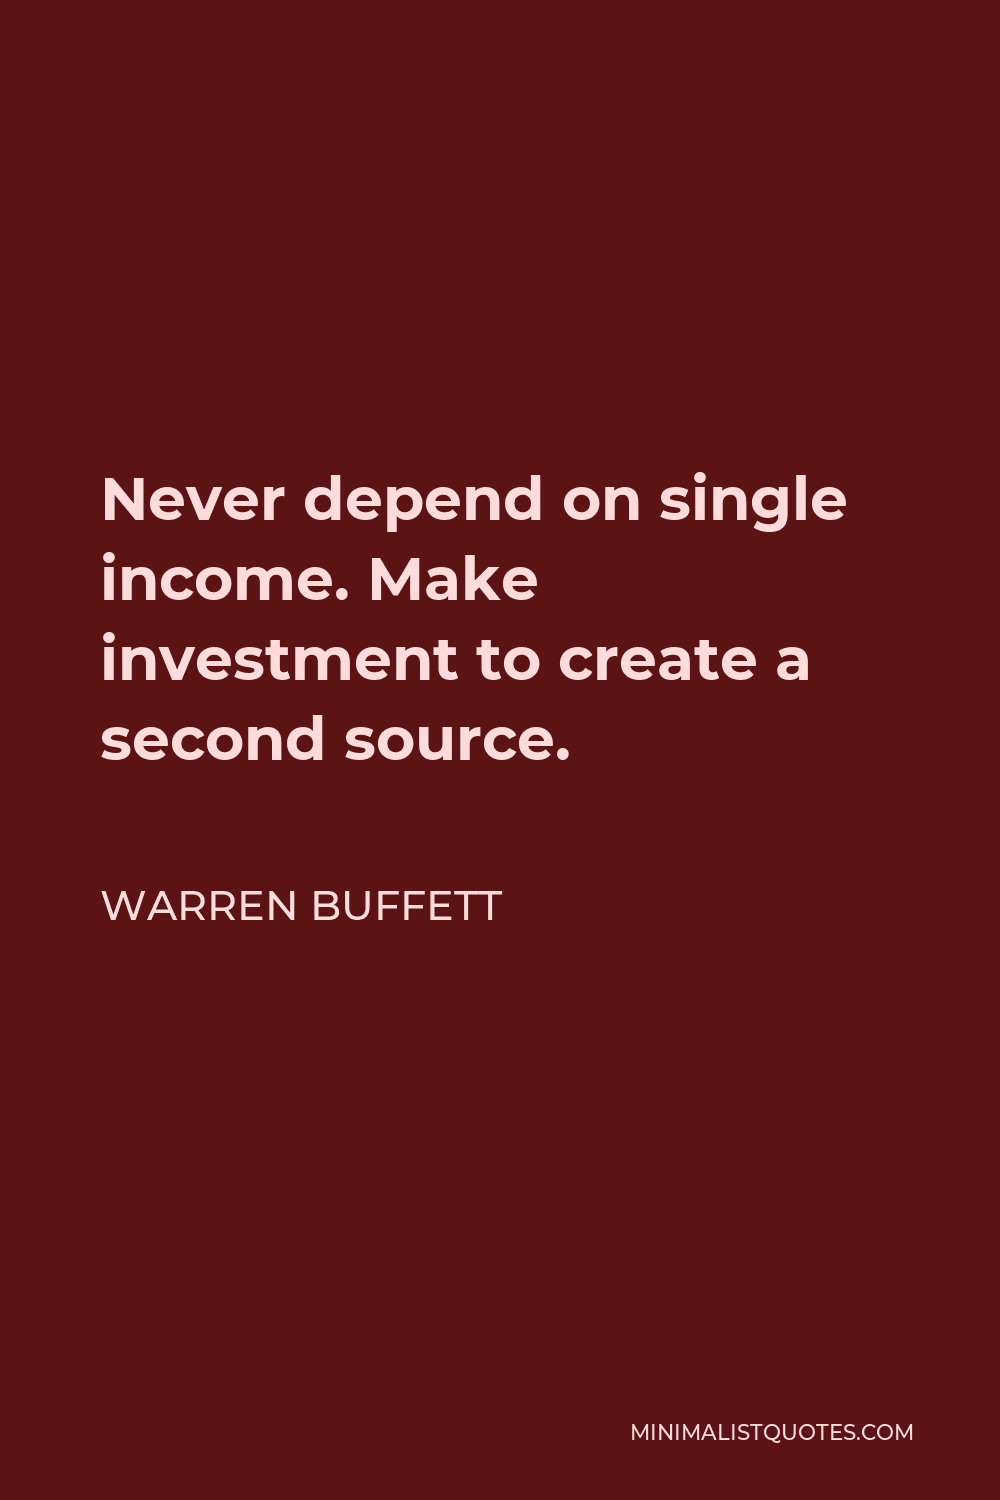 Warren Buffett Quote - Never depend on single income. Make investment to create a second source.